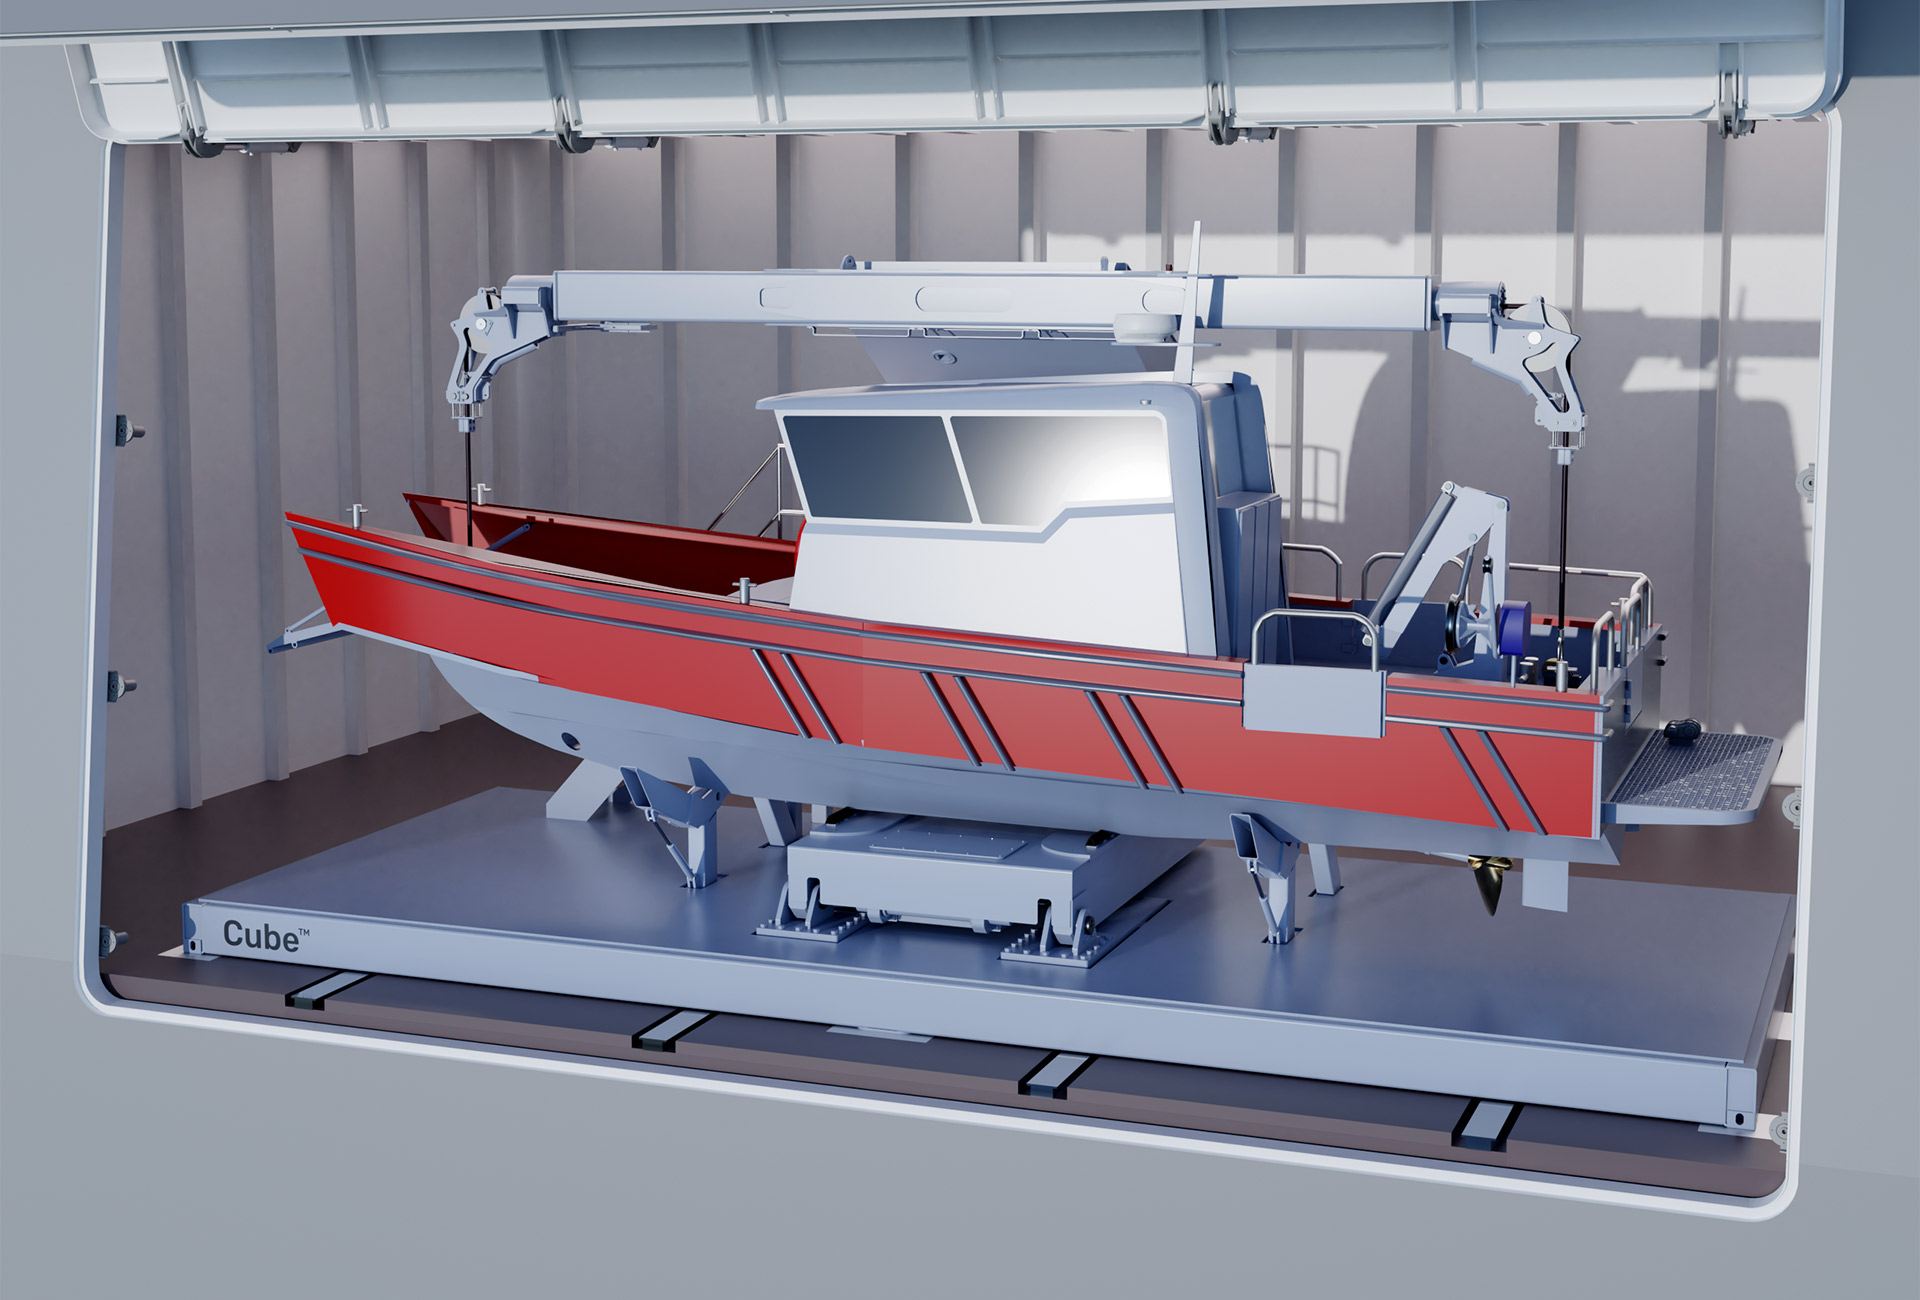 Work Boat System